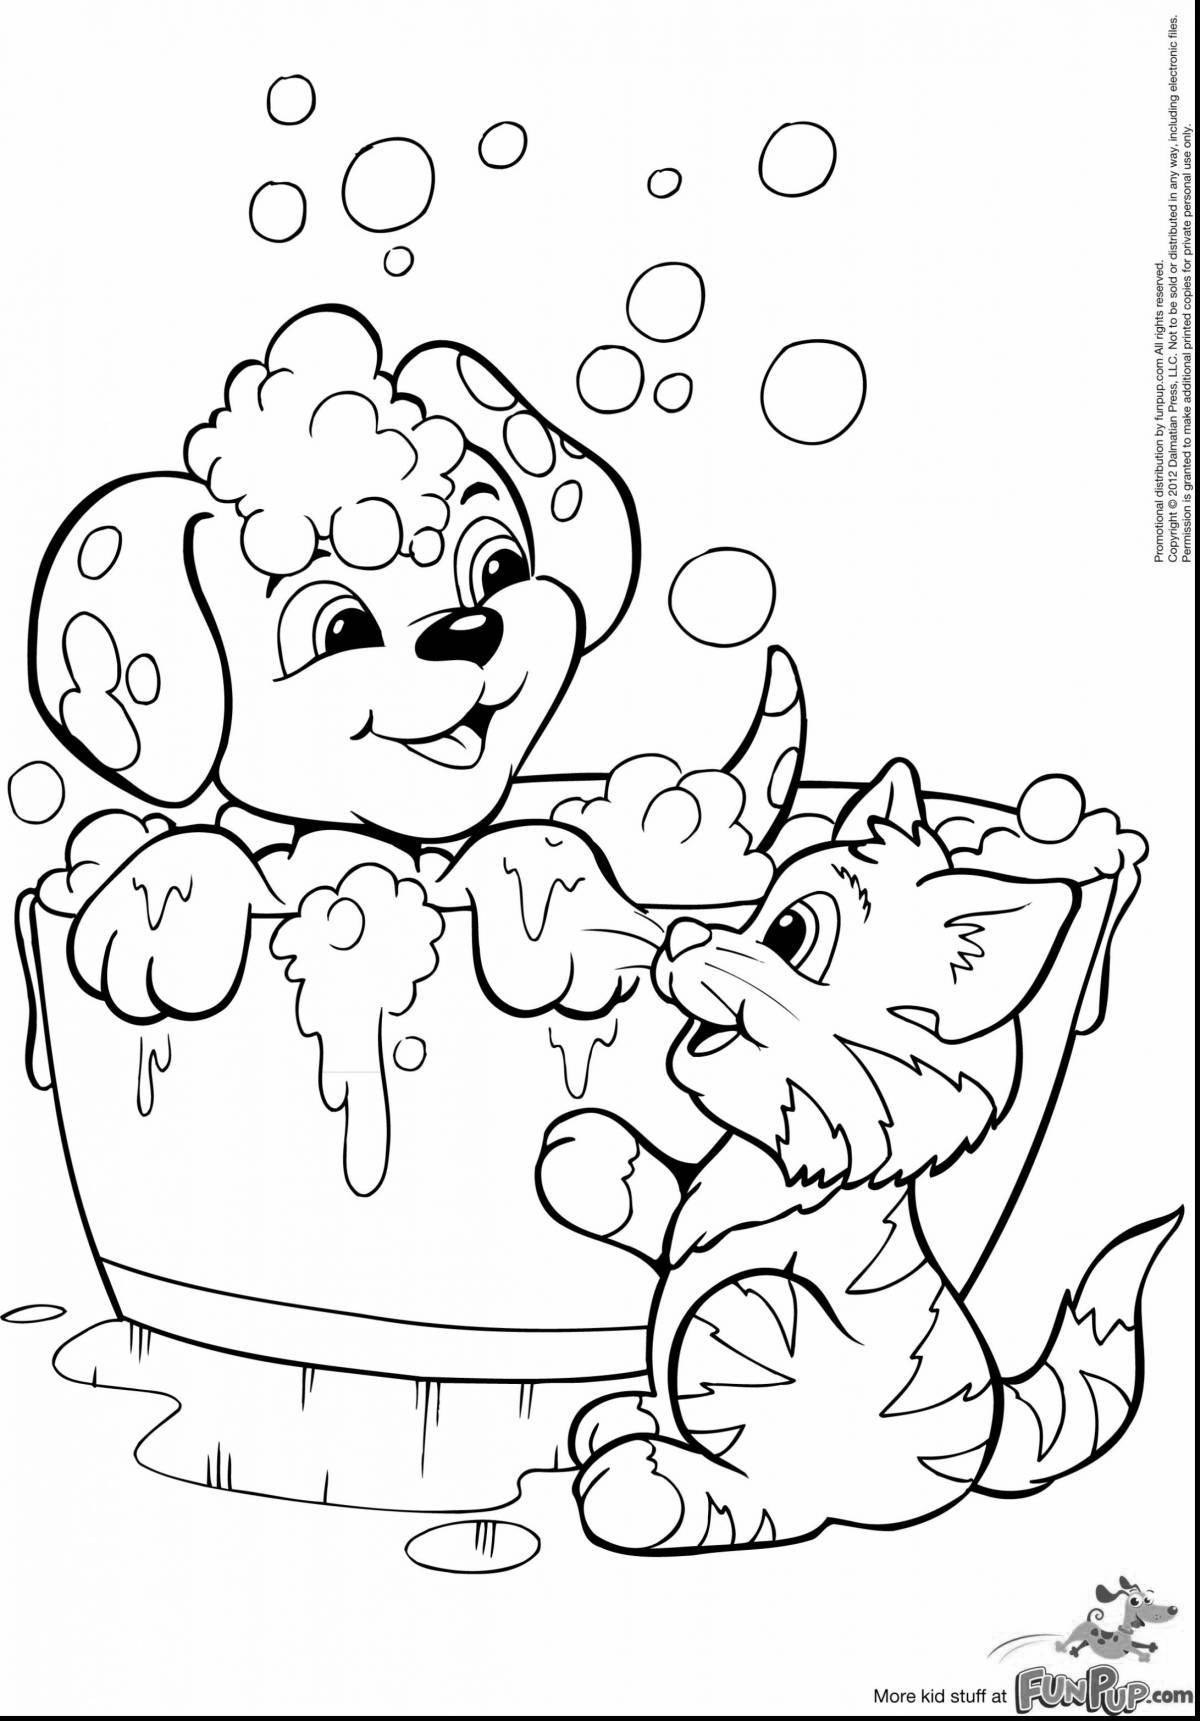 Bubble cat and dog coloring book